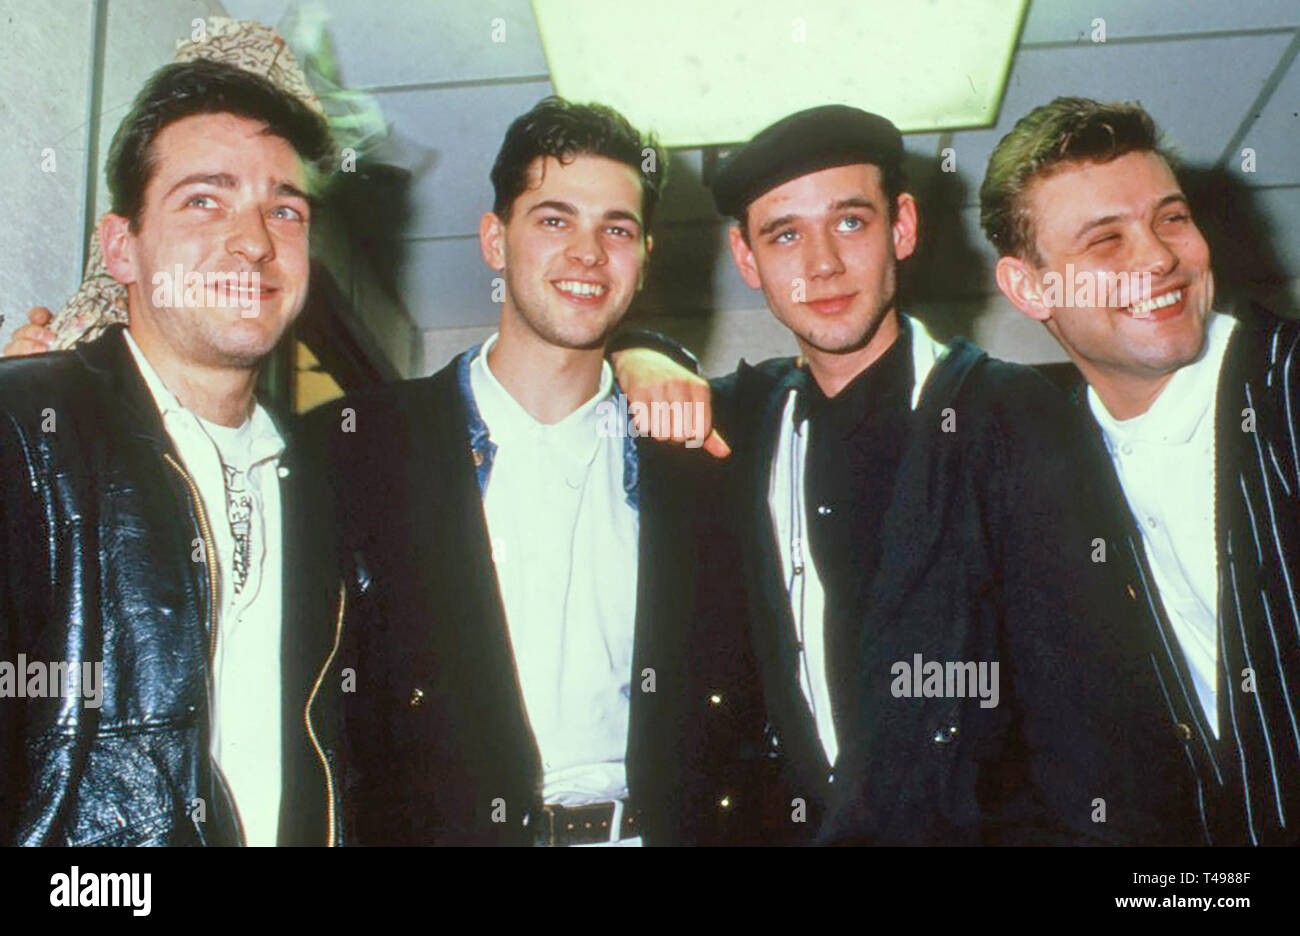 CURIOSITY KILLED THE CAT British pop band about about 1988 with lead singer Ben Volpeliere second from right Stock Photo